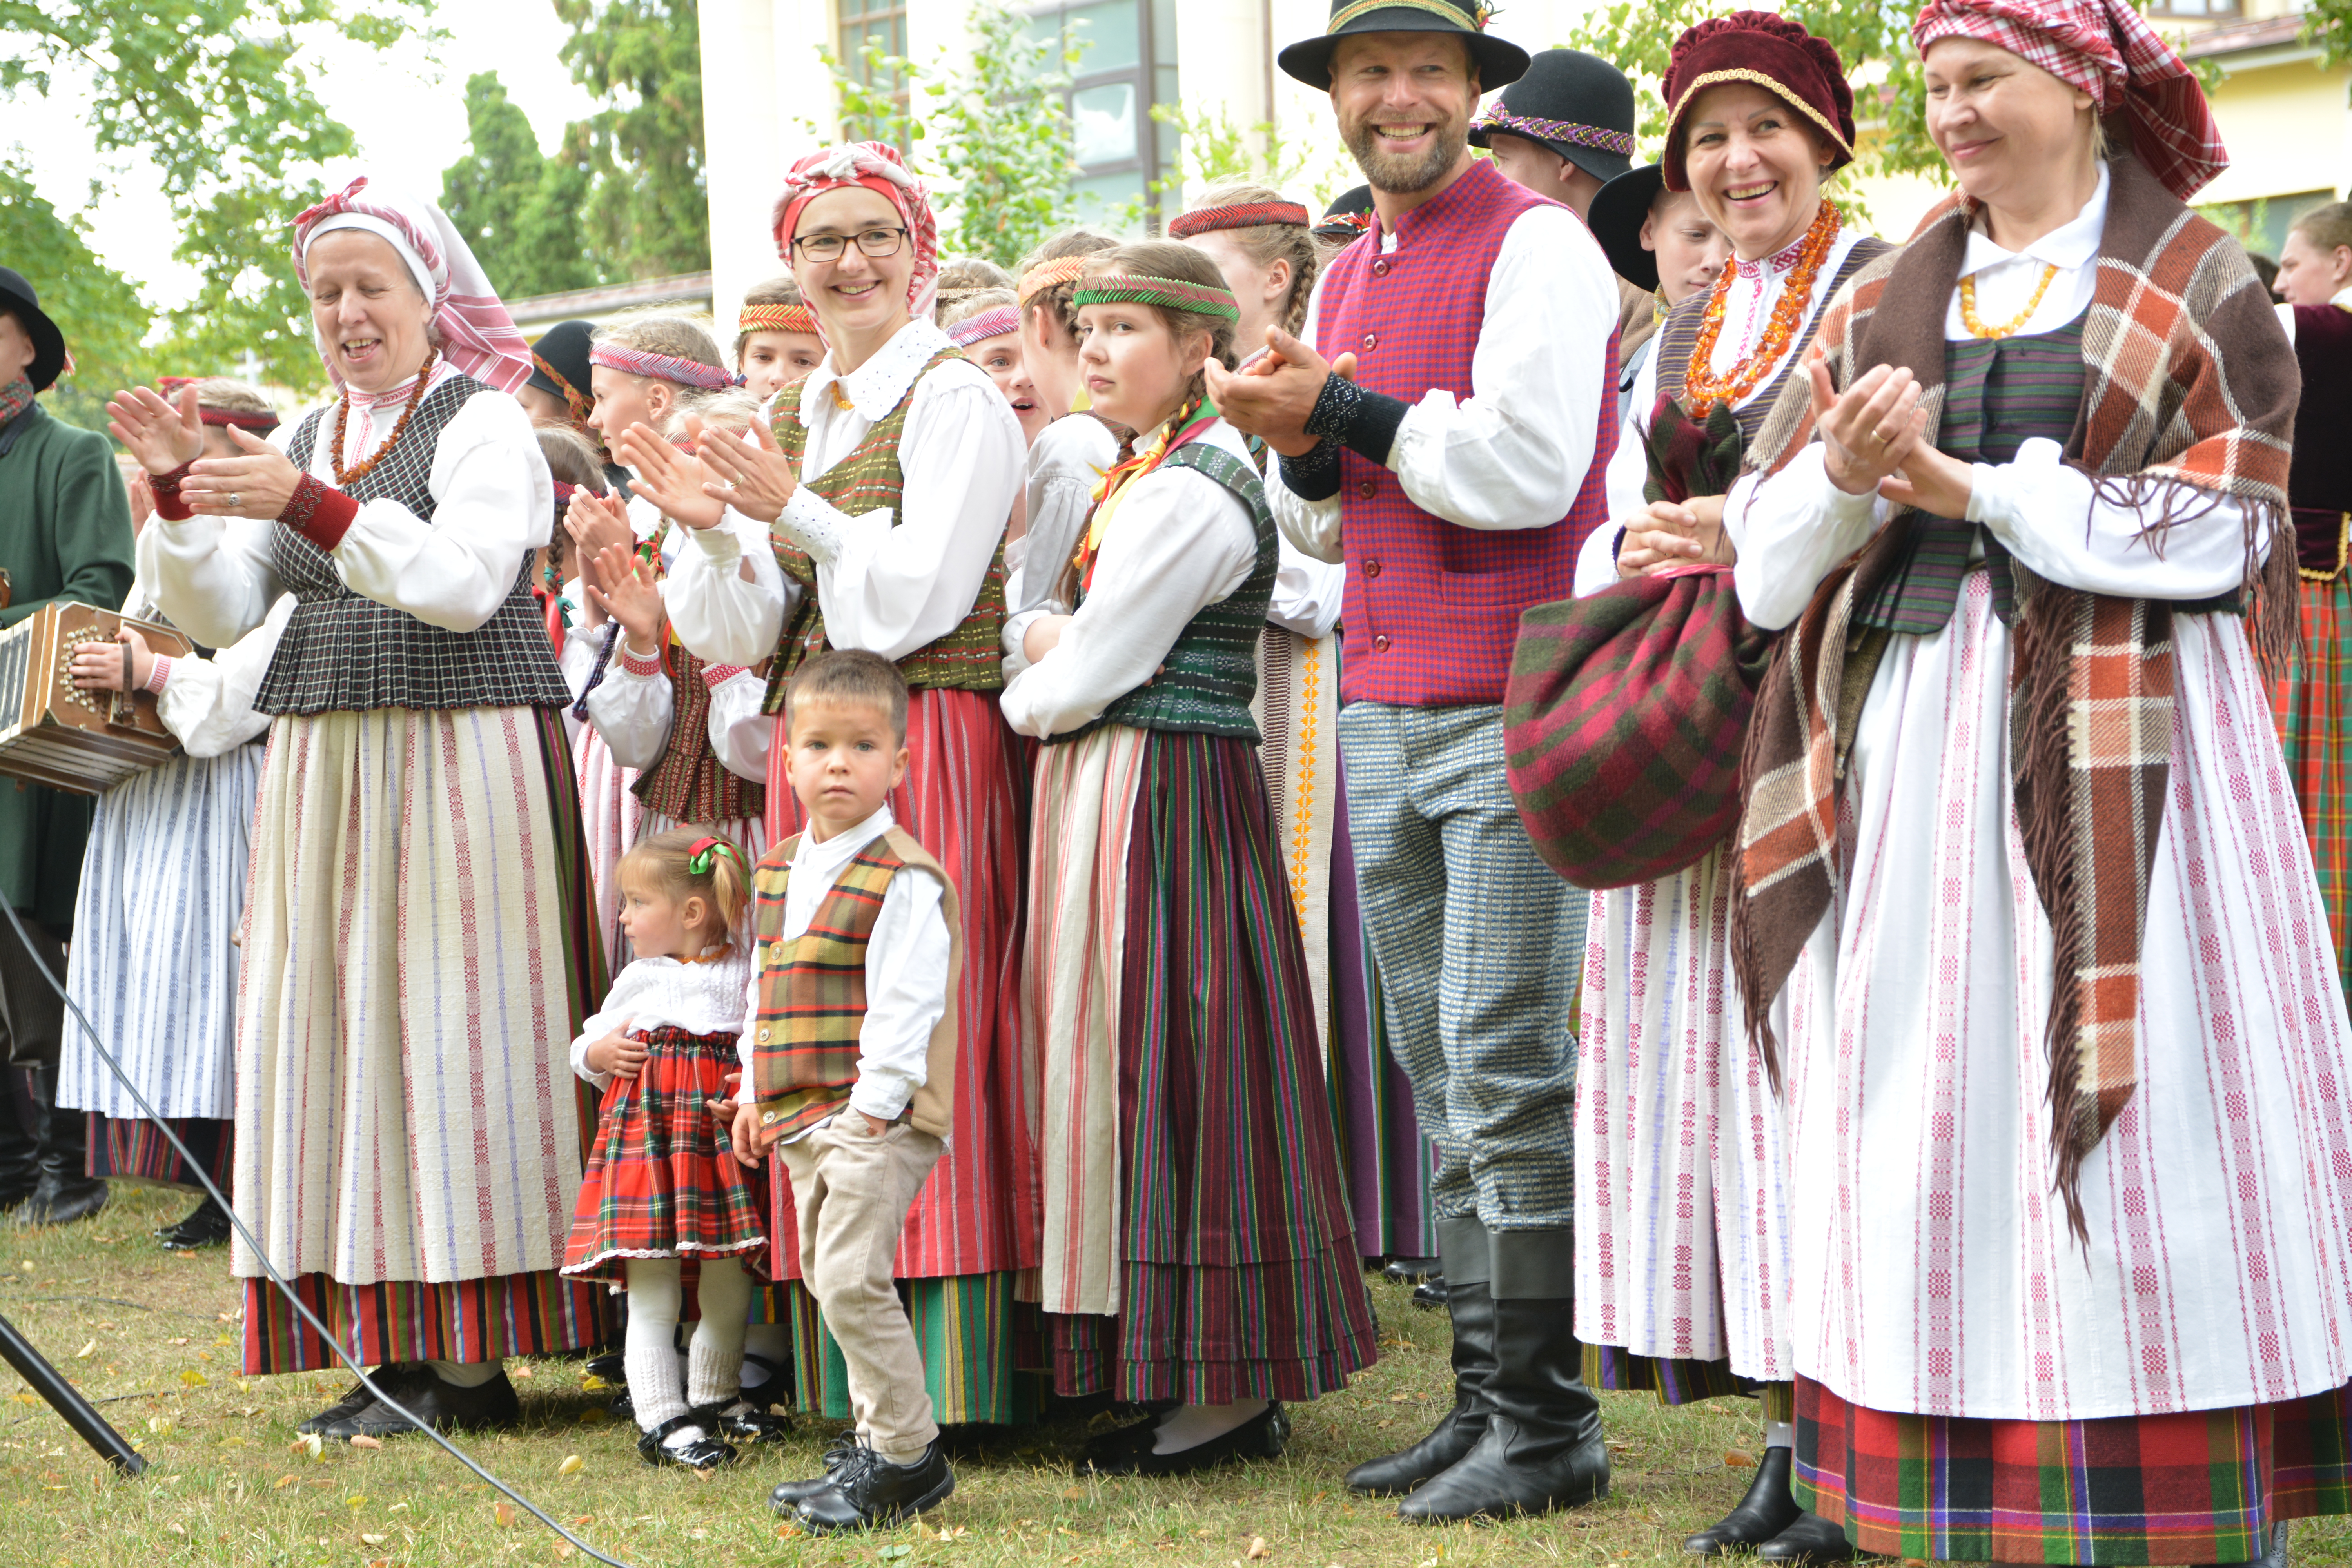 During the Folklore Day in Vilnius, Lithuania